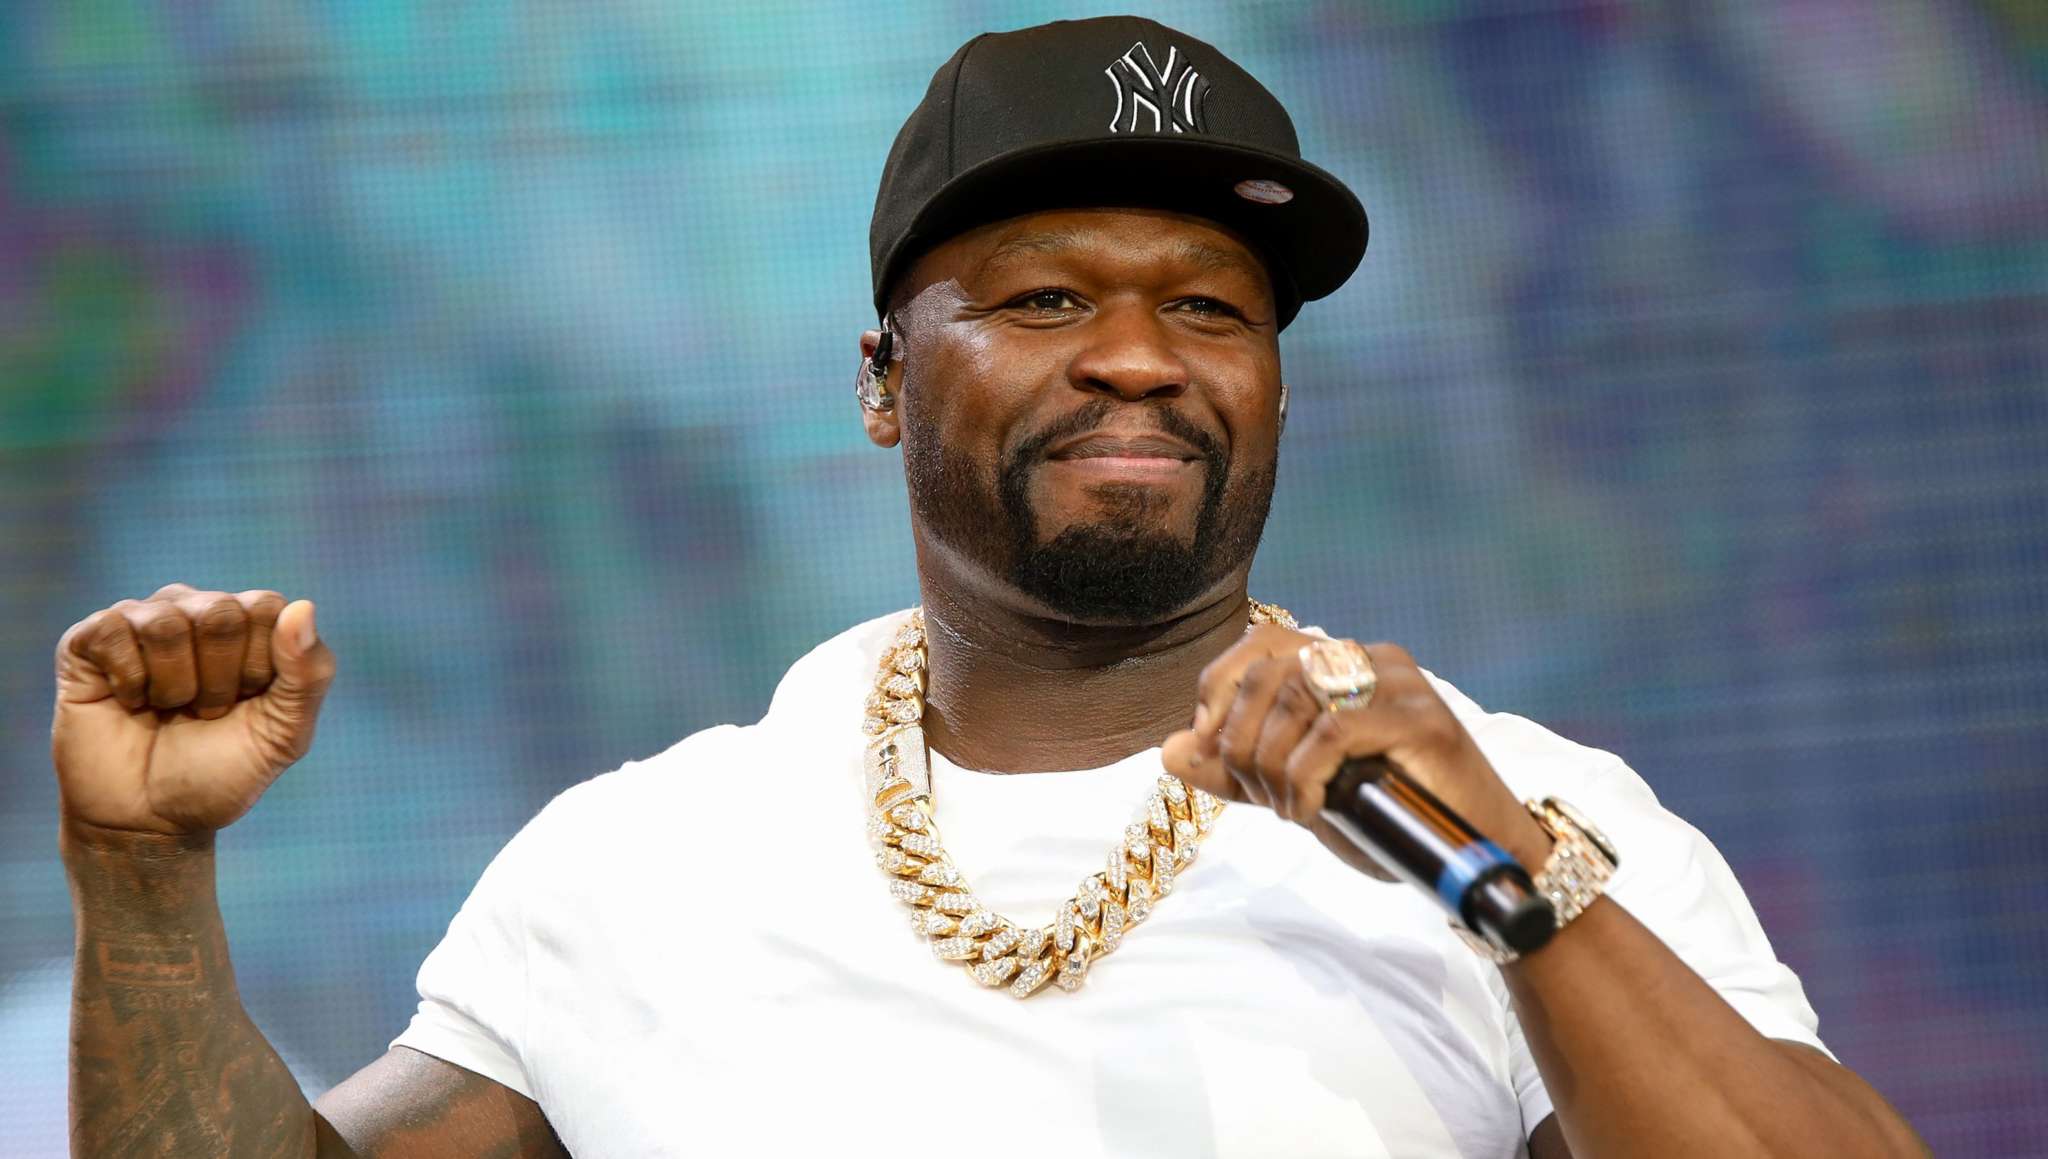 50 Cent Reveals 'The Best Rapper In The World' - He Comes Second